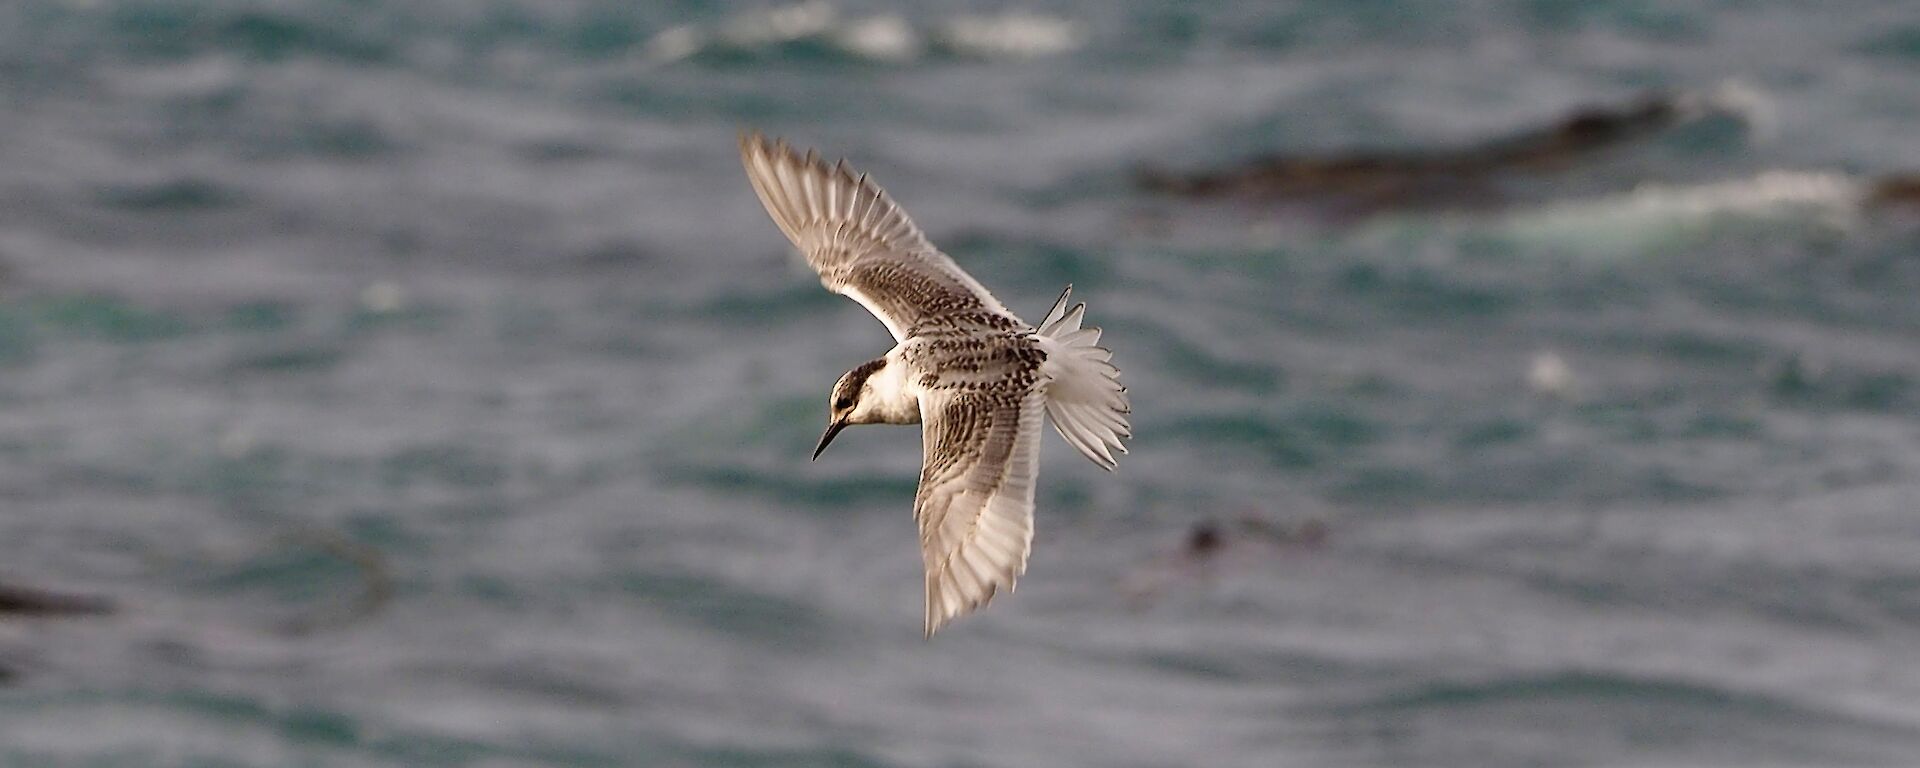 Juvenile tern on the wing